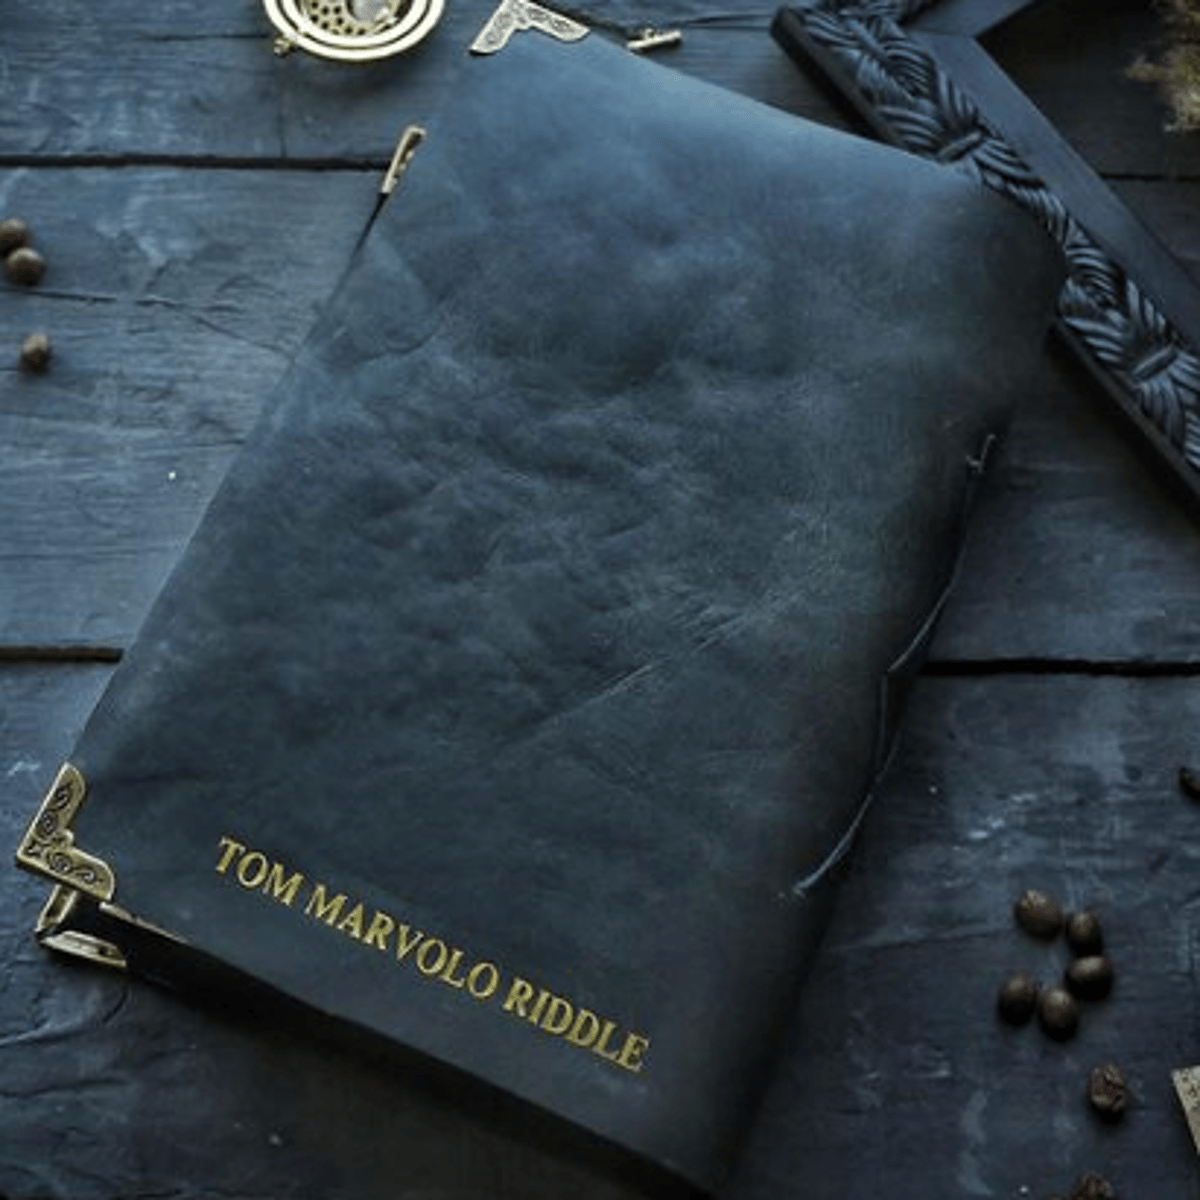 Tom Riddle's Diary